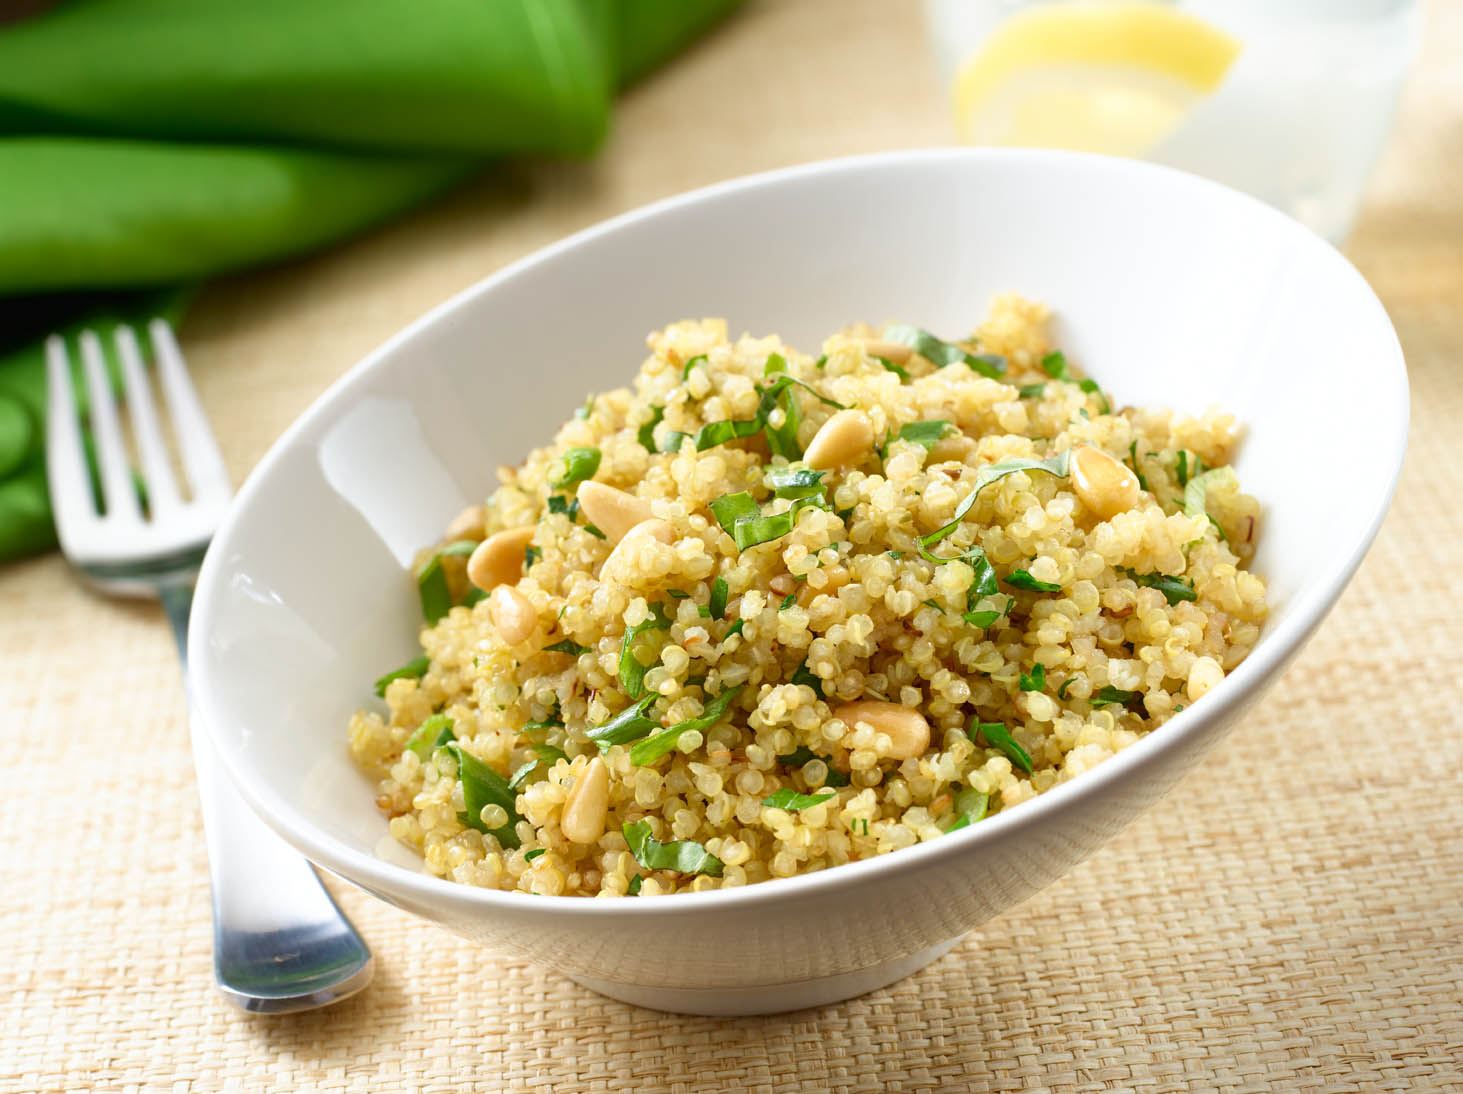 Herbed Quinoa Pilaf with Pine Nuts